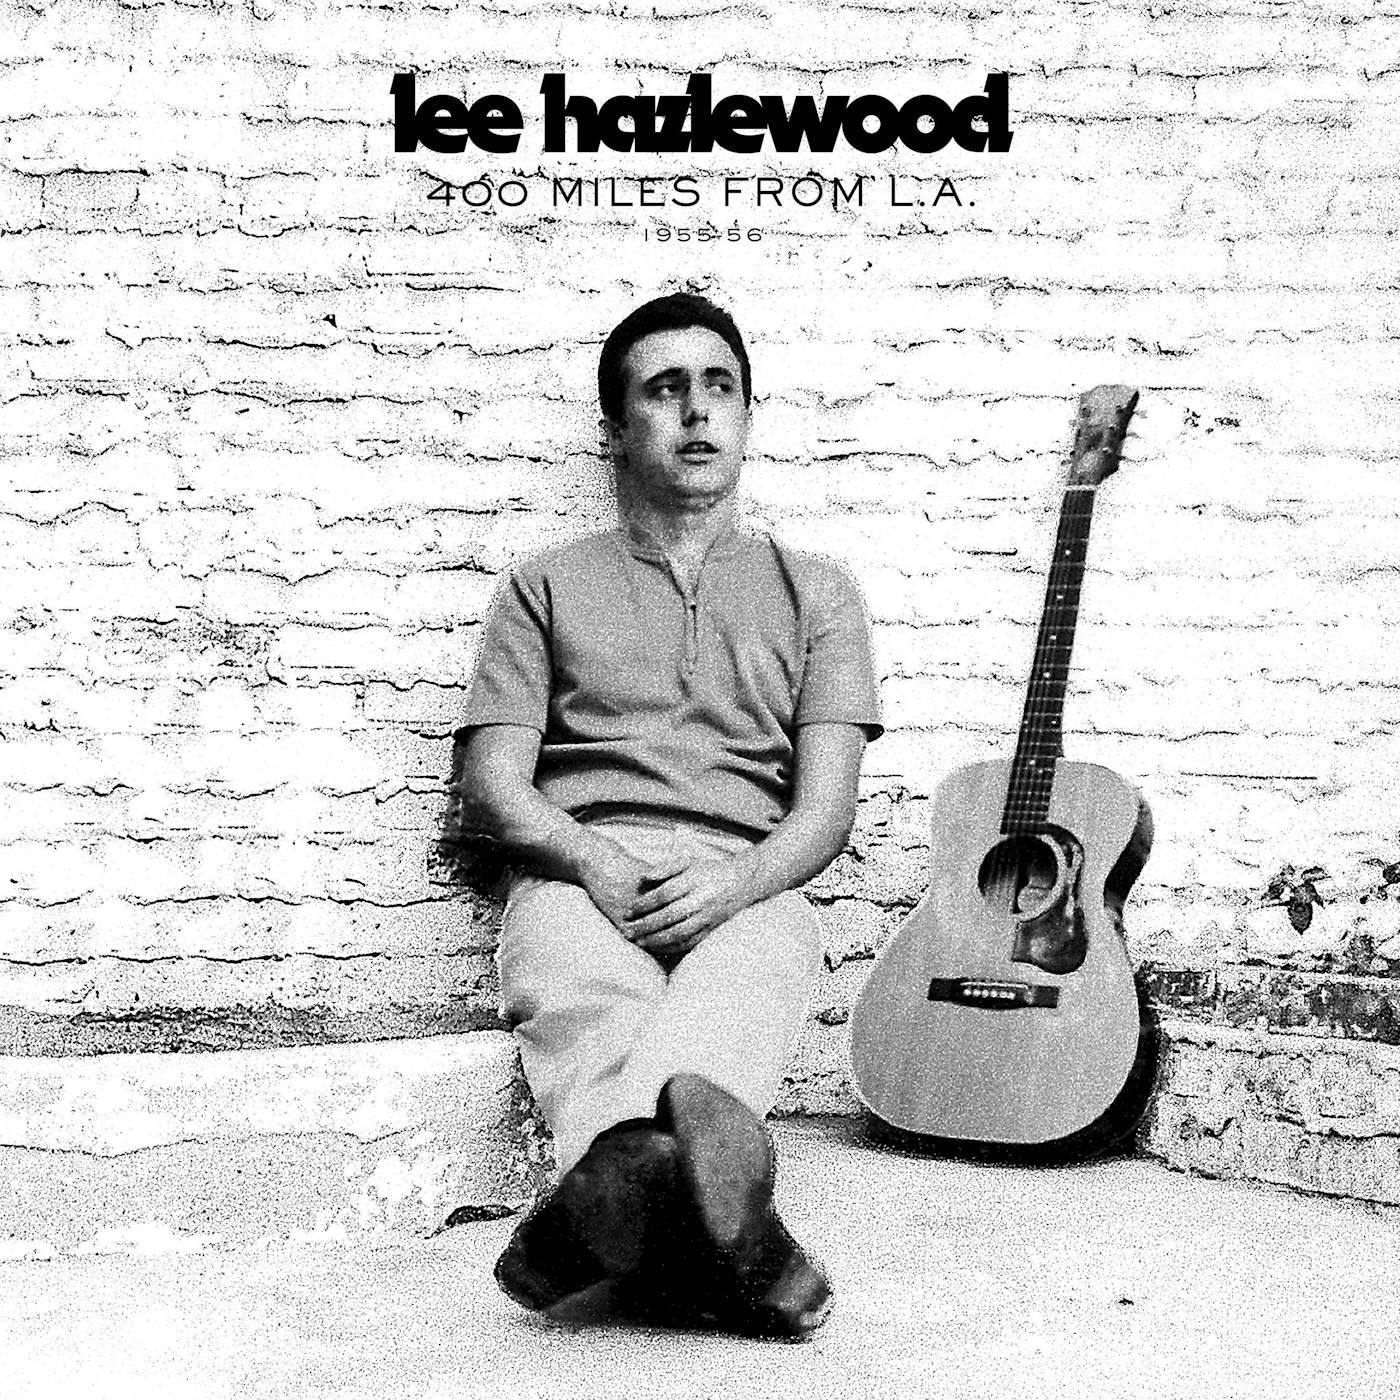 Lee Hazlewood 400 MILES FROM L.A. 1955-56 CD